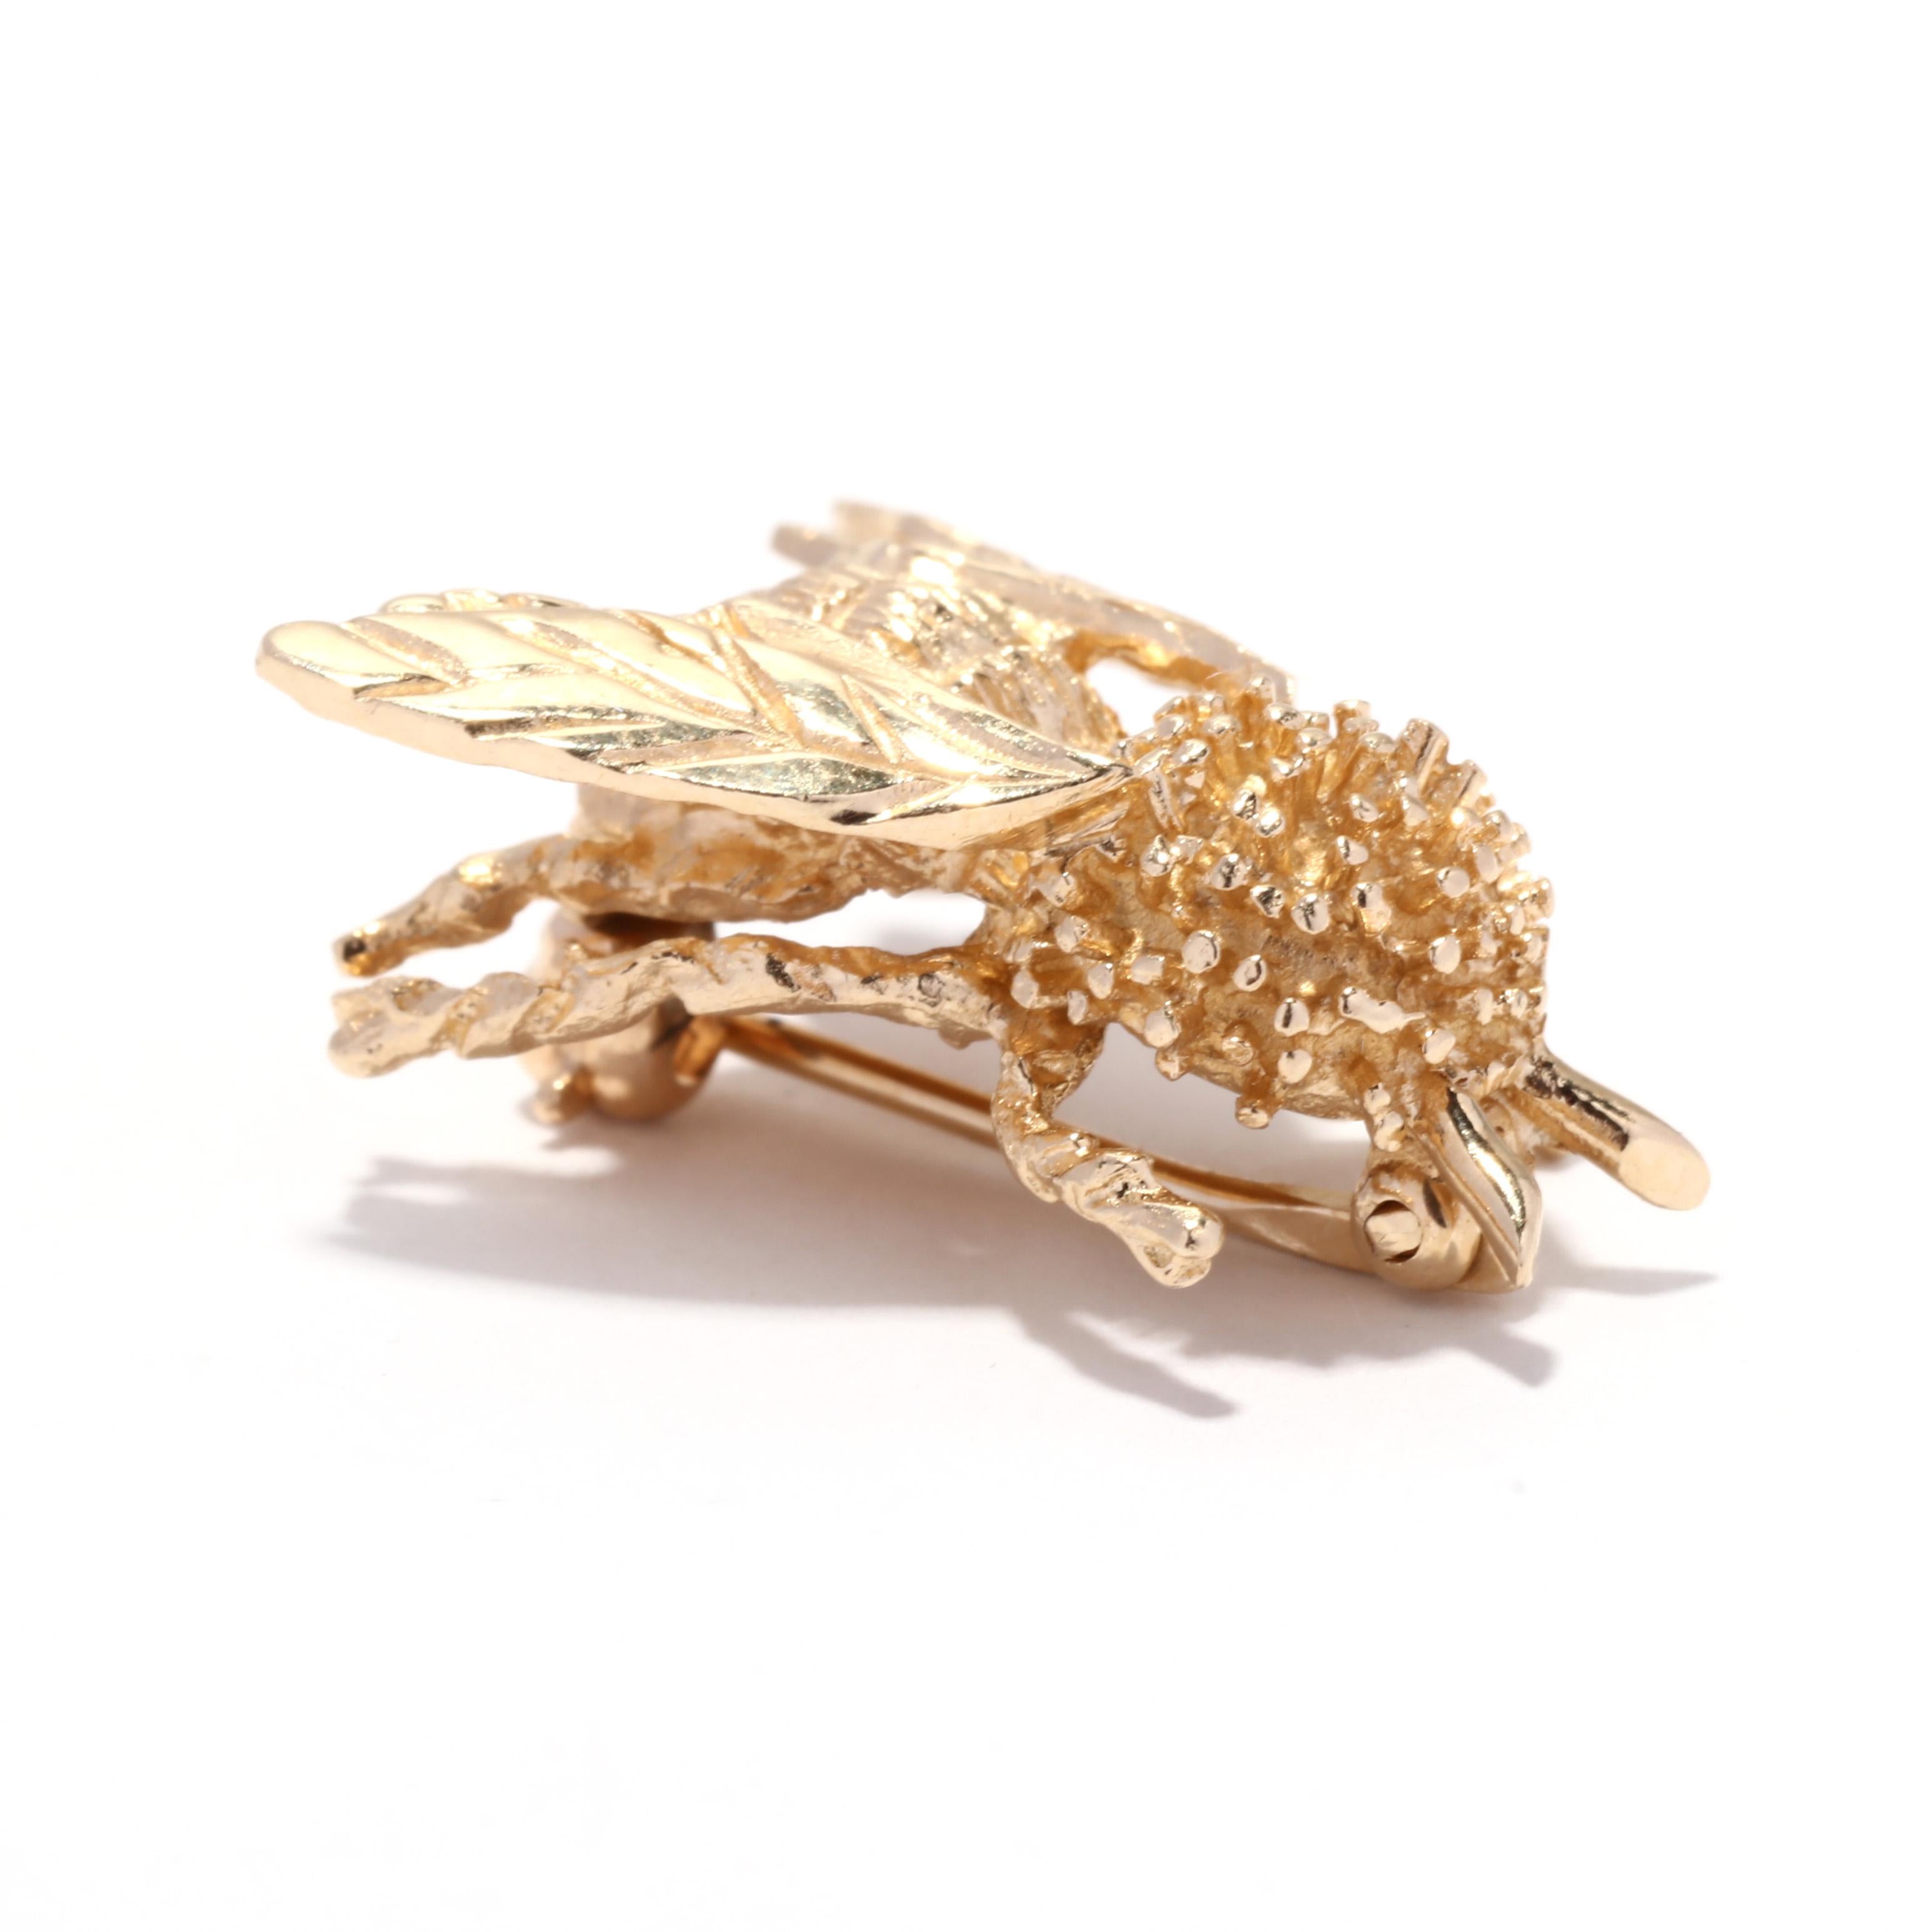 Women's or Men's Gold Bumble Bee Brooch, 14KT Yellow Gold, Length 3/4 inch, Simple Bee Brooch